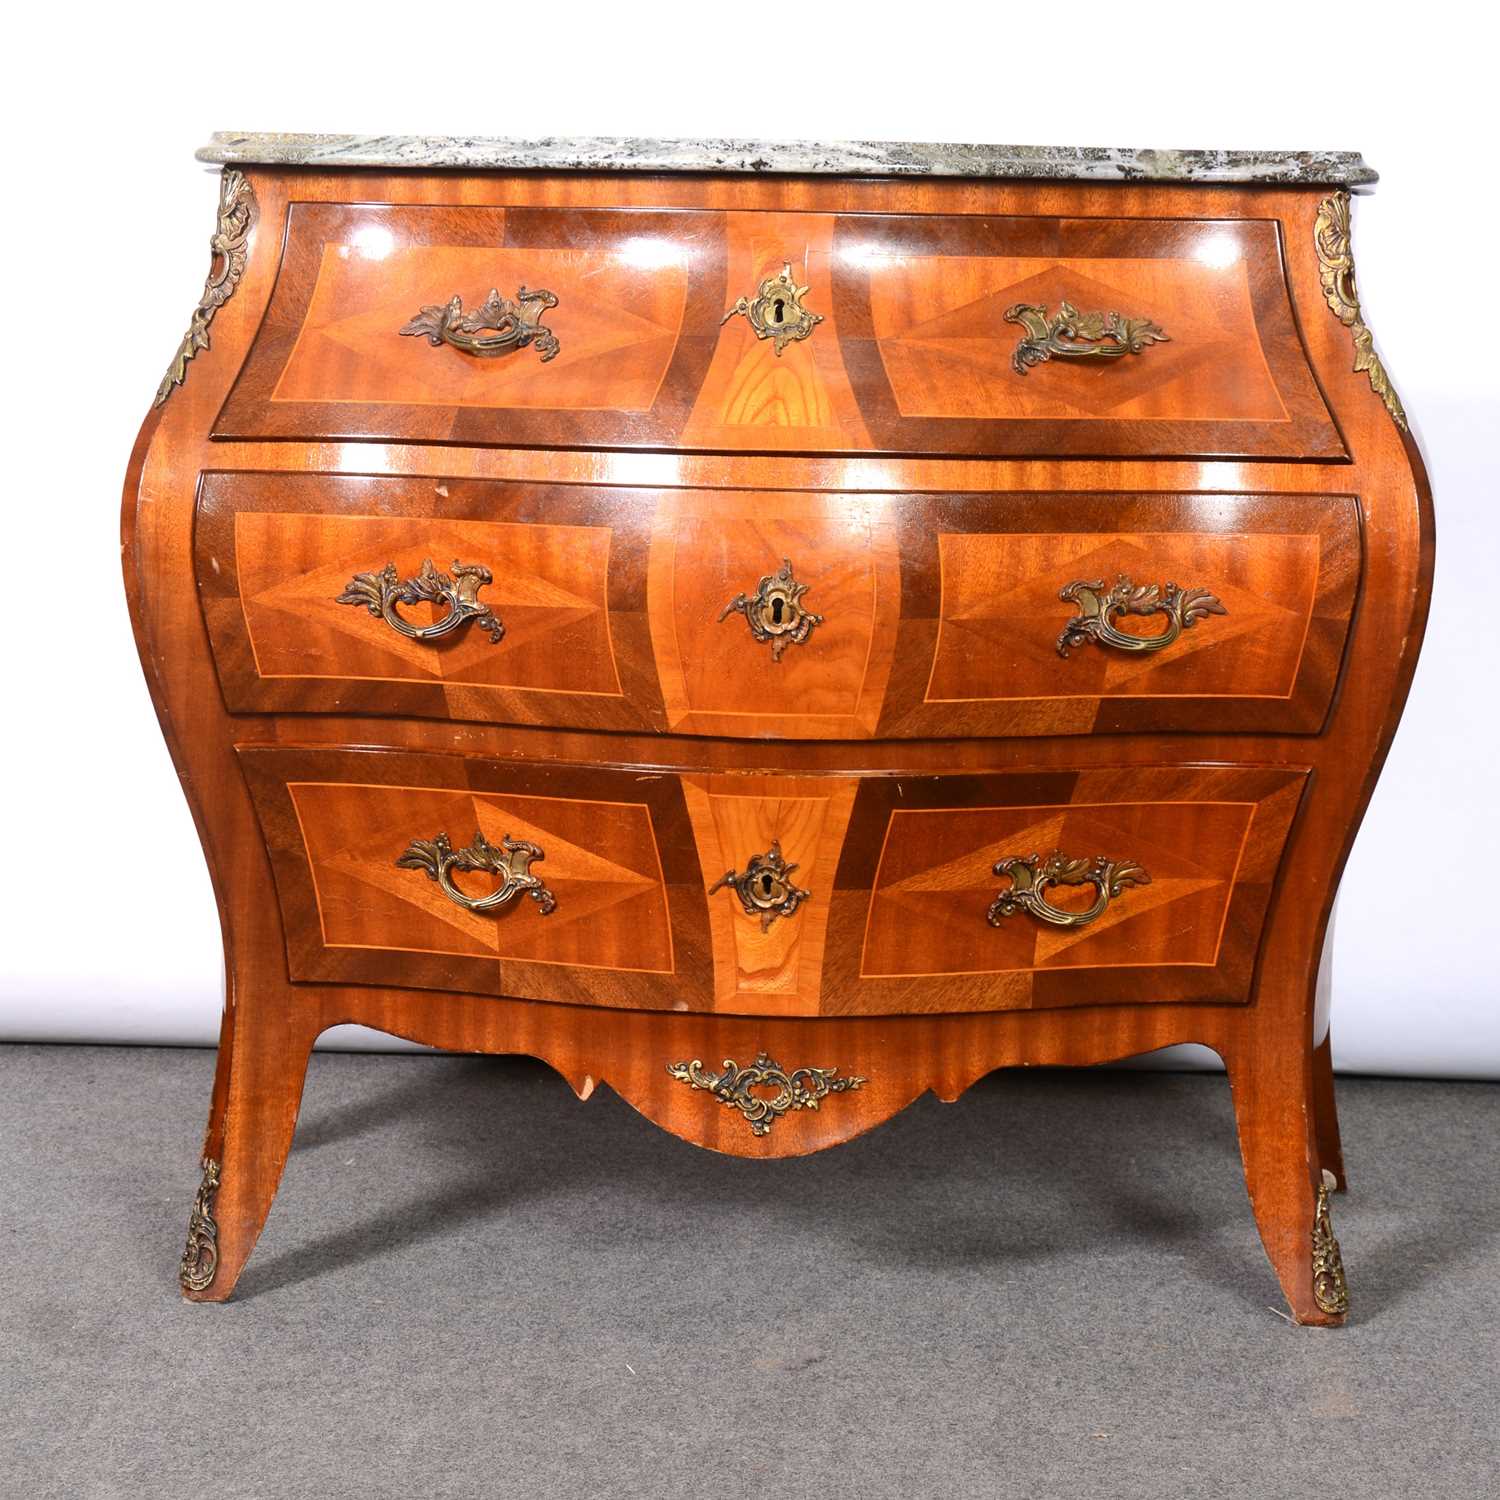 Lot 77 - Continental mahogany and kingwood chest of drawers, Louis XV style